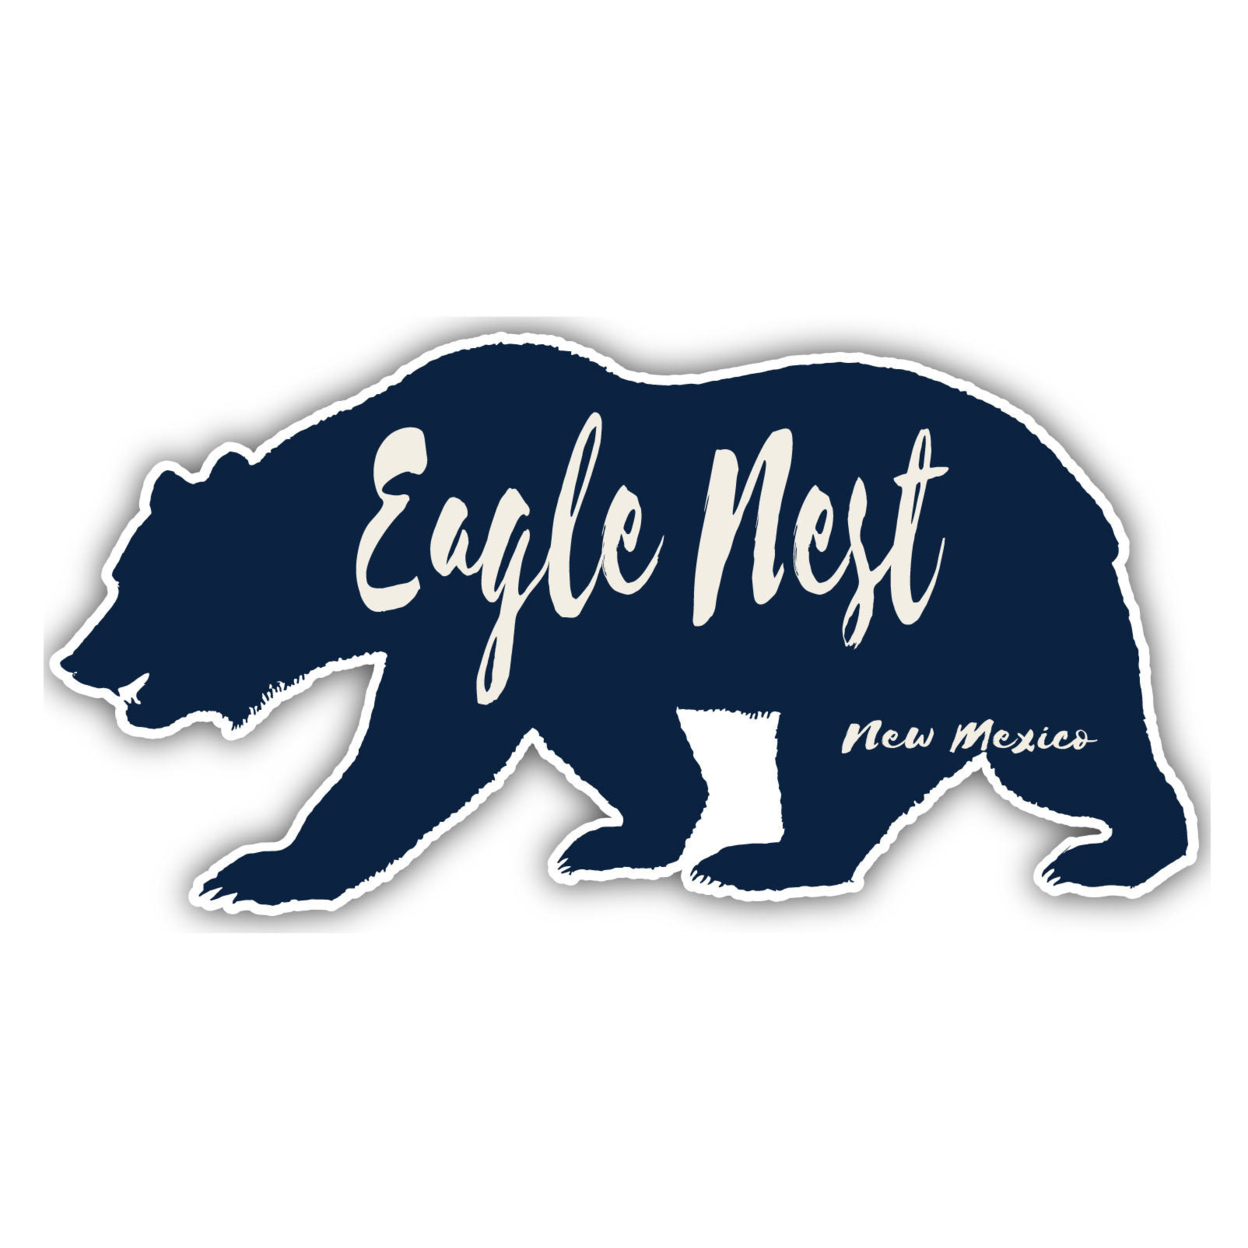 Eagle Nest New Mexico Souvenir Decorative Stickers (Choose Theme And Size) - 4-Pack, 10-Inch, Great Outdoors